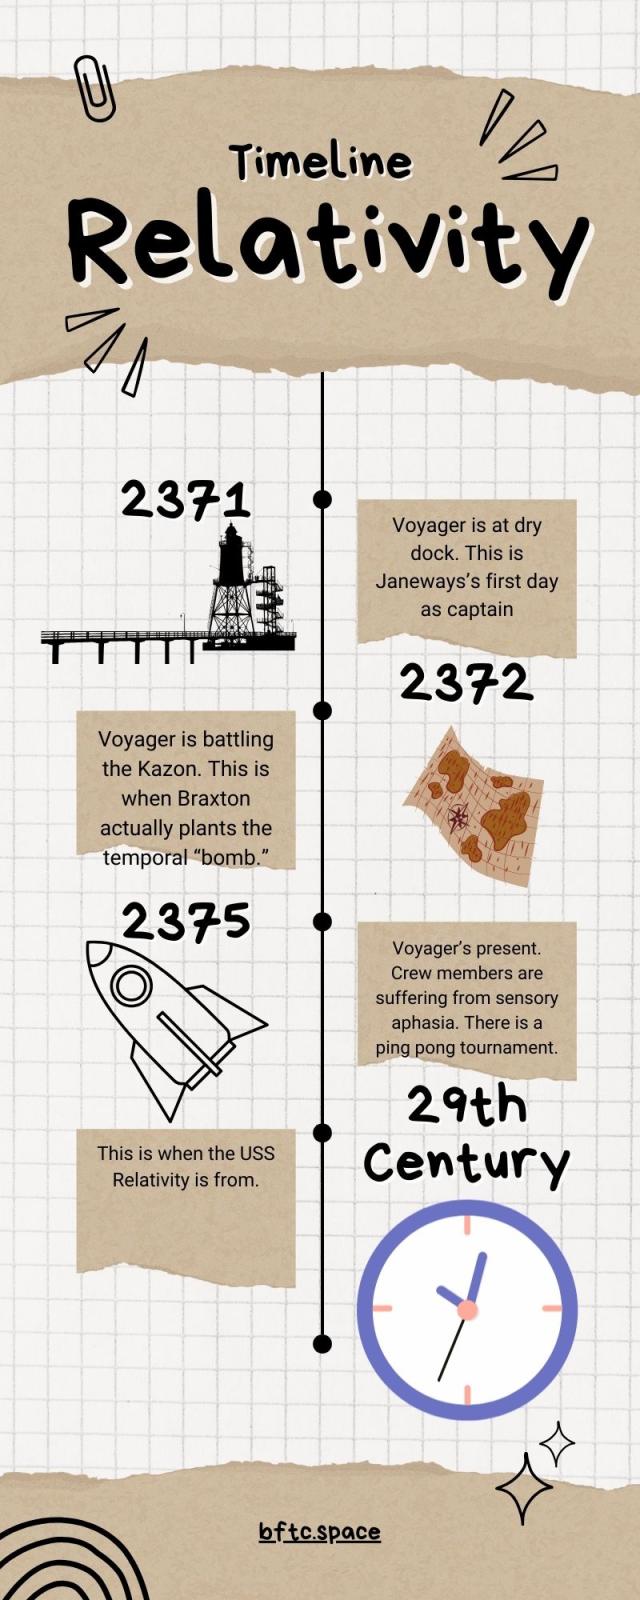 A timeline for 'Relativity': in 2371, Voyager is in dry dock. In 2372, Voyager is battling the Kazon and Braxton plants his bomb. In 2375, there is a ping-pong tournament. The USS Relativity is from the 29th Century.